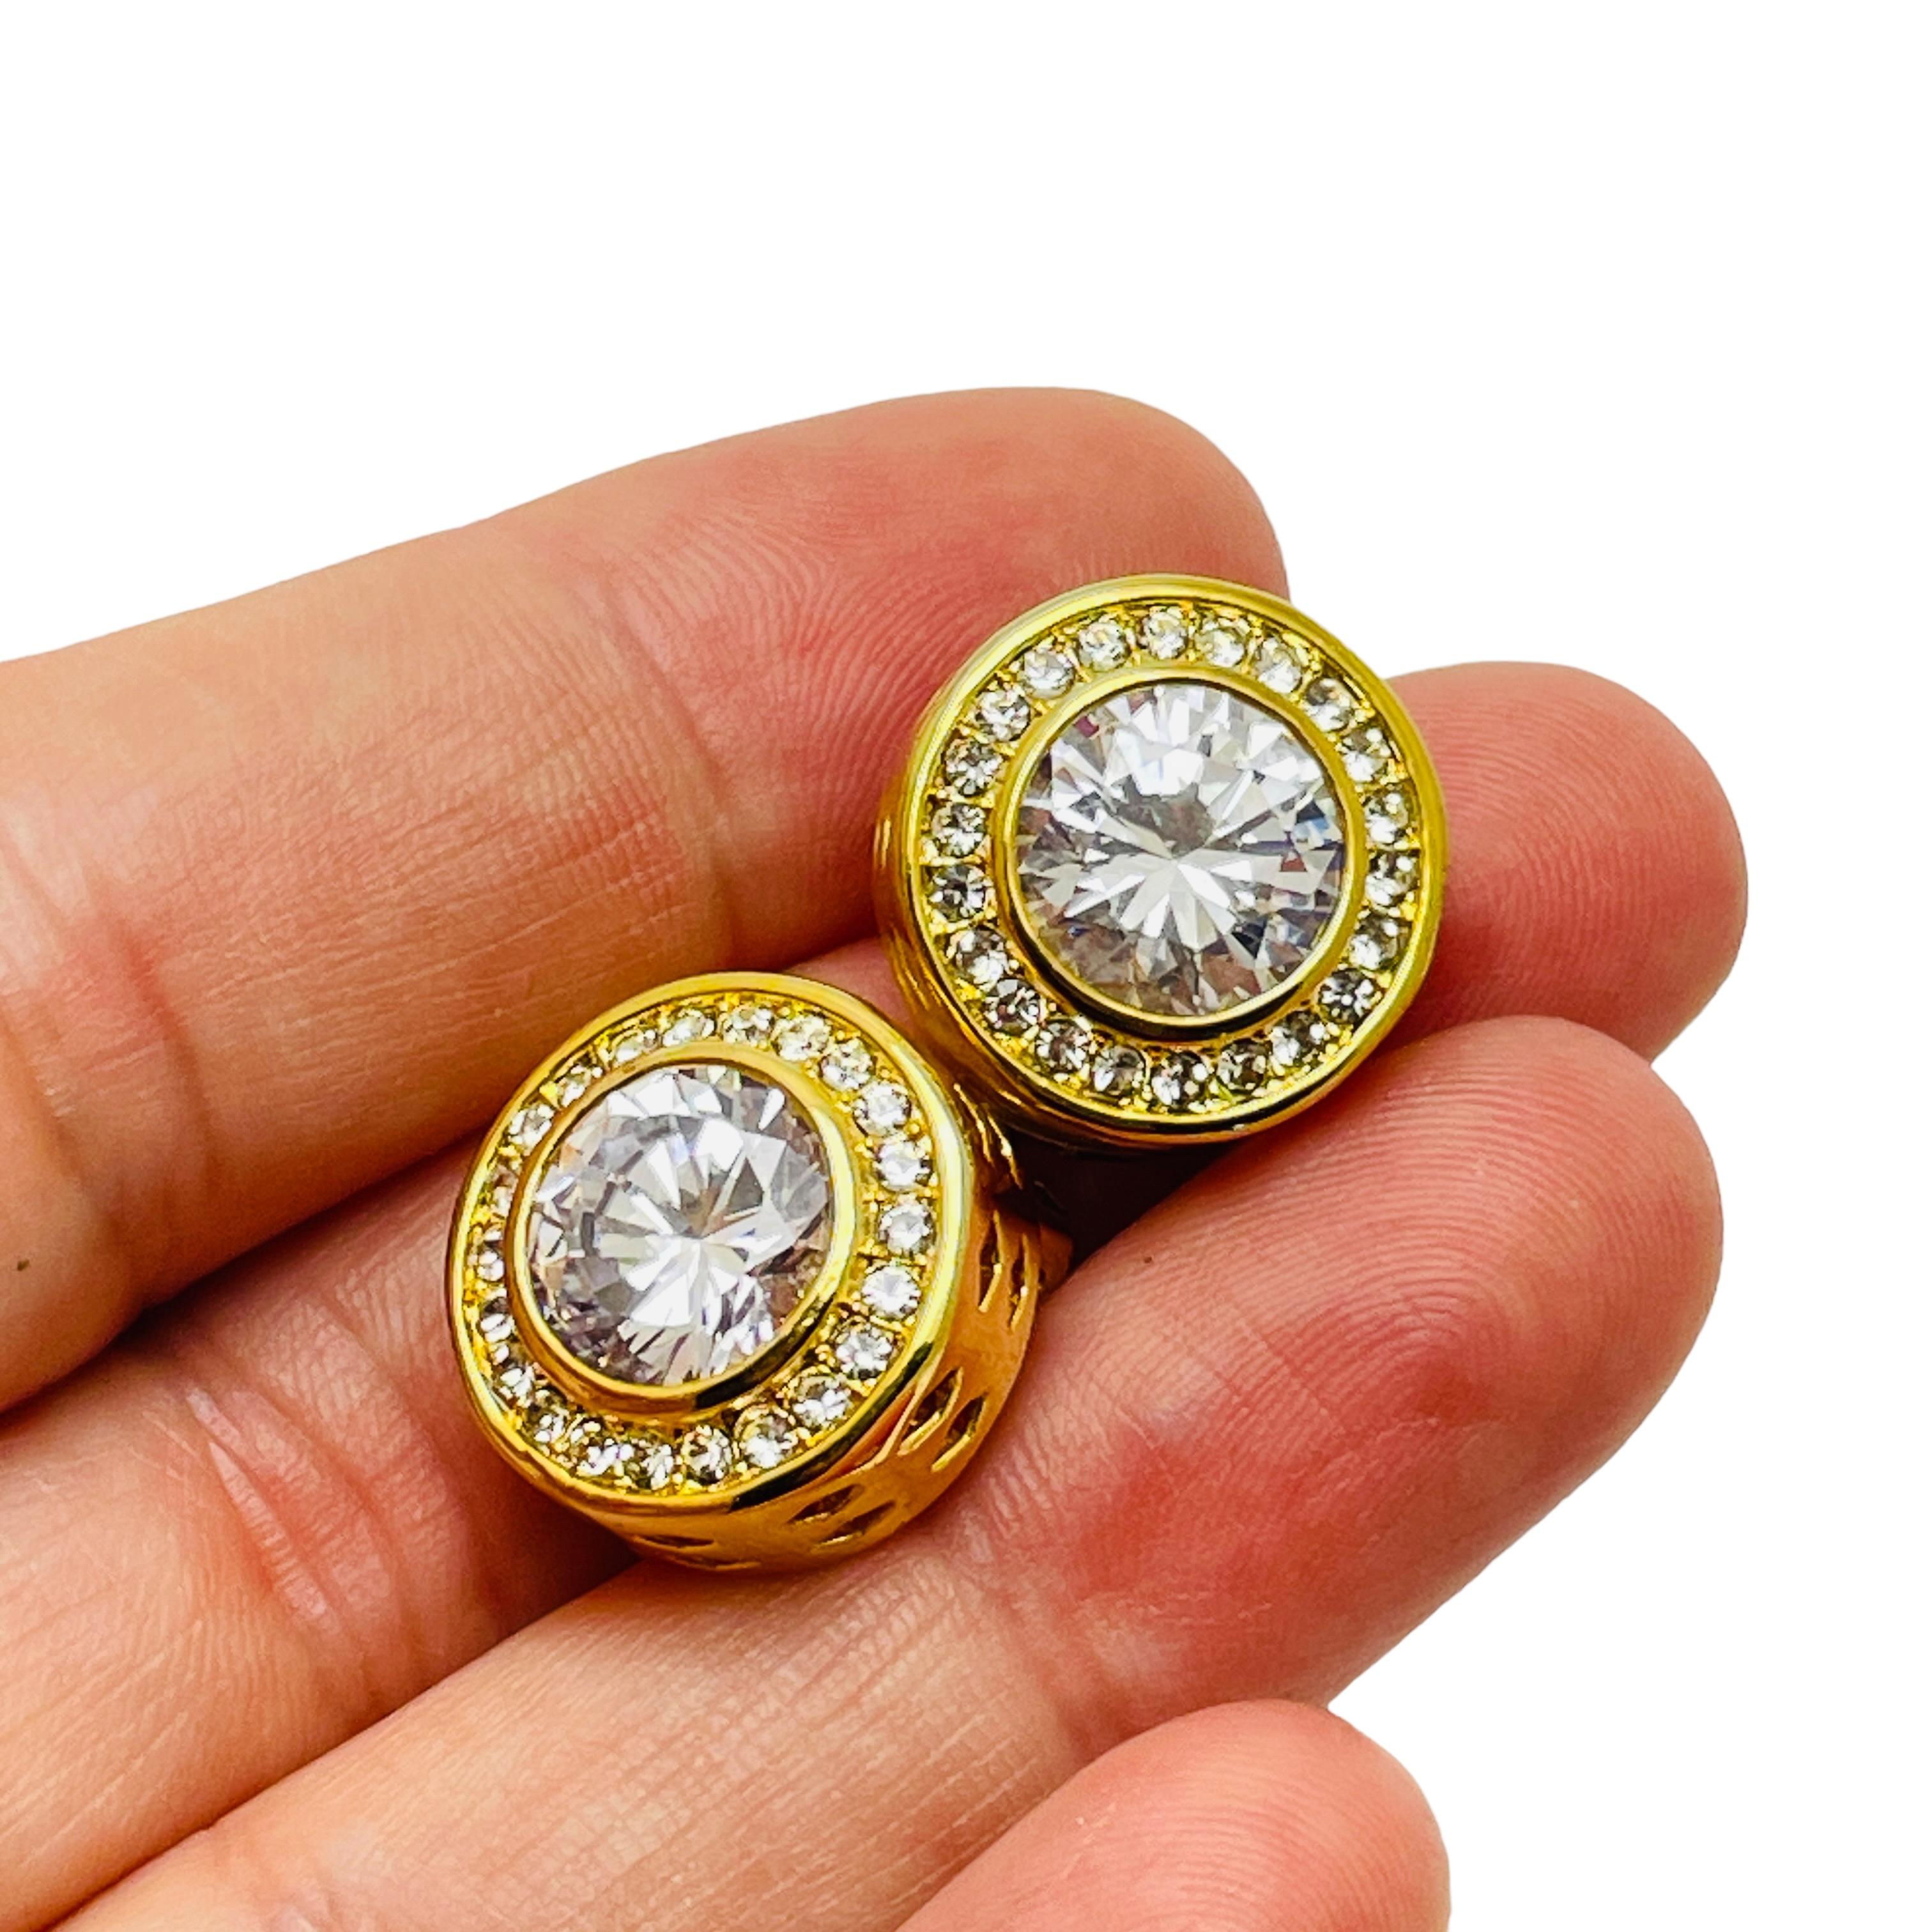 DETAILS

• unsigned

• gold tone with rhinestones 

• vintage designer runway earrings

MEASUREMENTS

• 

CONDITION

• excellent vintage condition with minimal signs of wear

❤️❤️ VINTAGE DESIGNER JEWELRY ❤️❤️
❤️❤️ ALEXANDER'S BOUTIQUE ❤️❤️